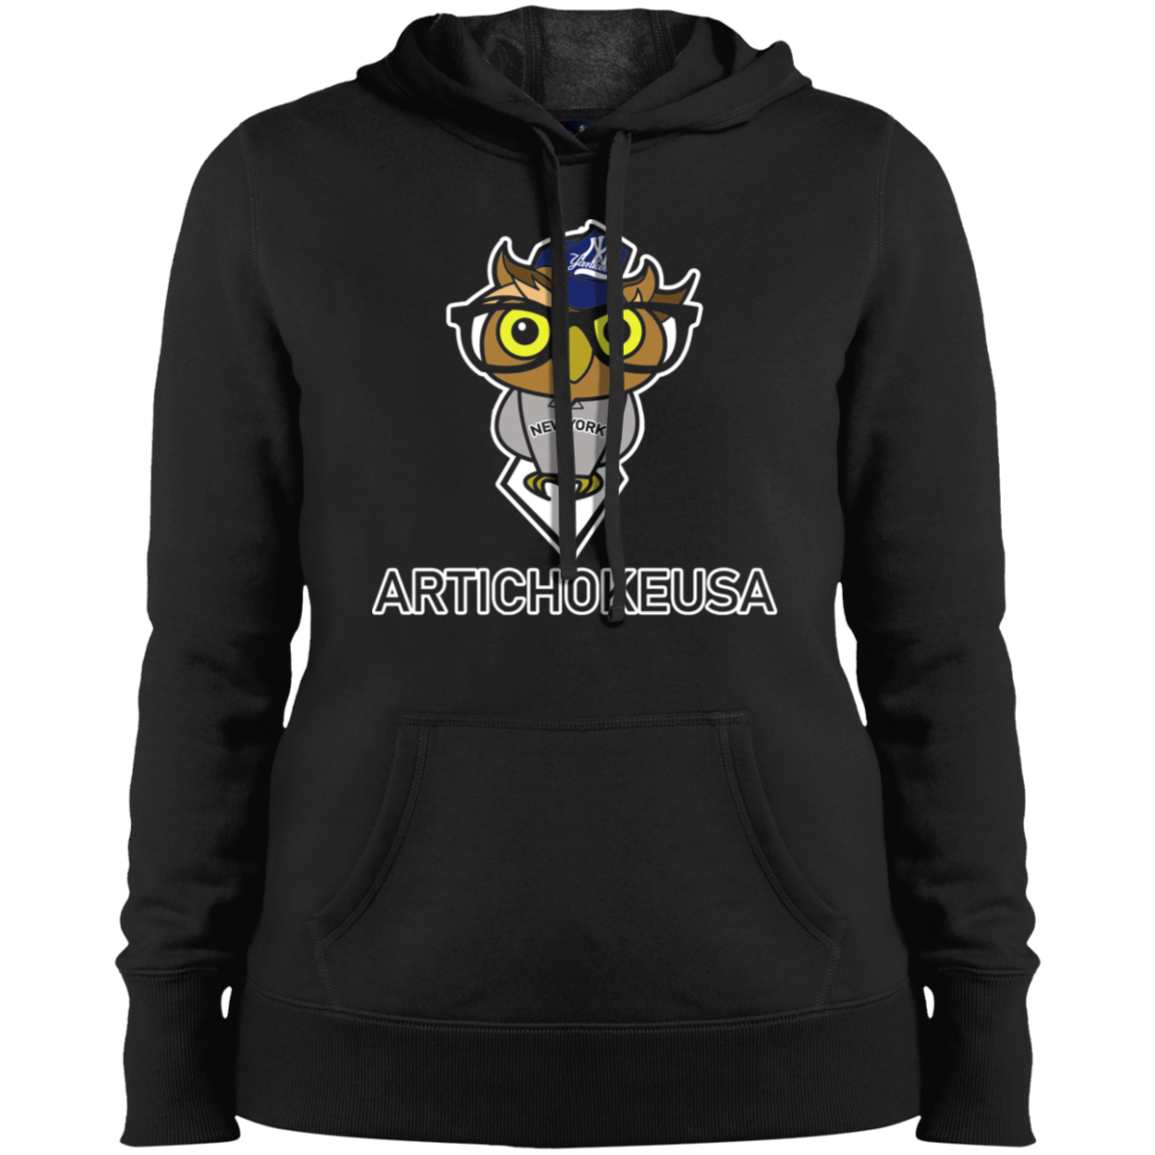 ArtichokeUSA Character and Font design. New York Owl. NY Yankees Fan Art. Let's Create Your Own Team Design Today. Ladies' Pullover Hooded Sweatshirt